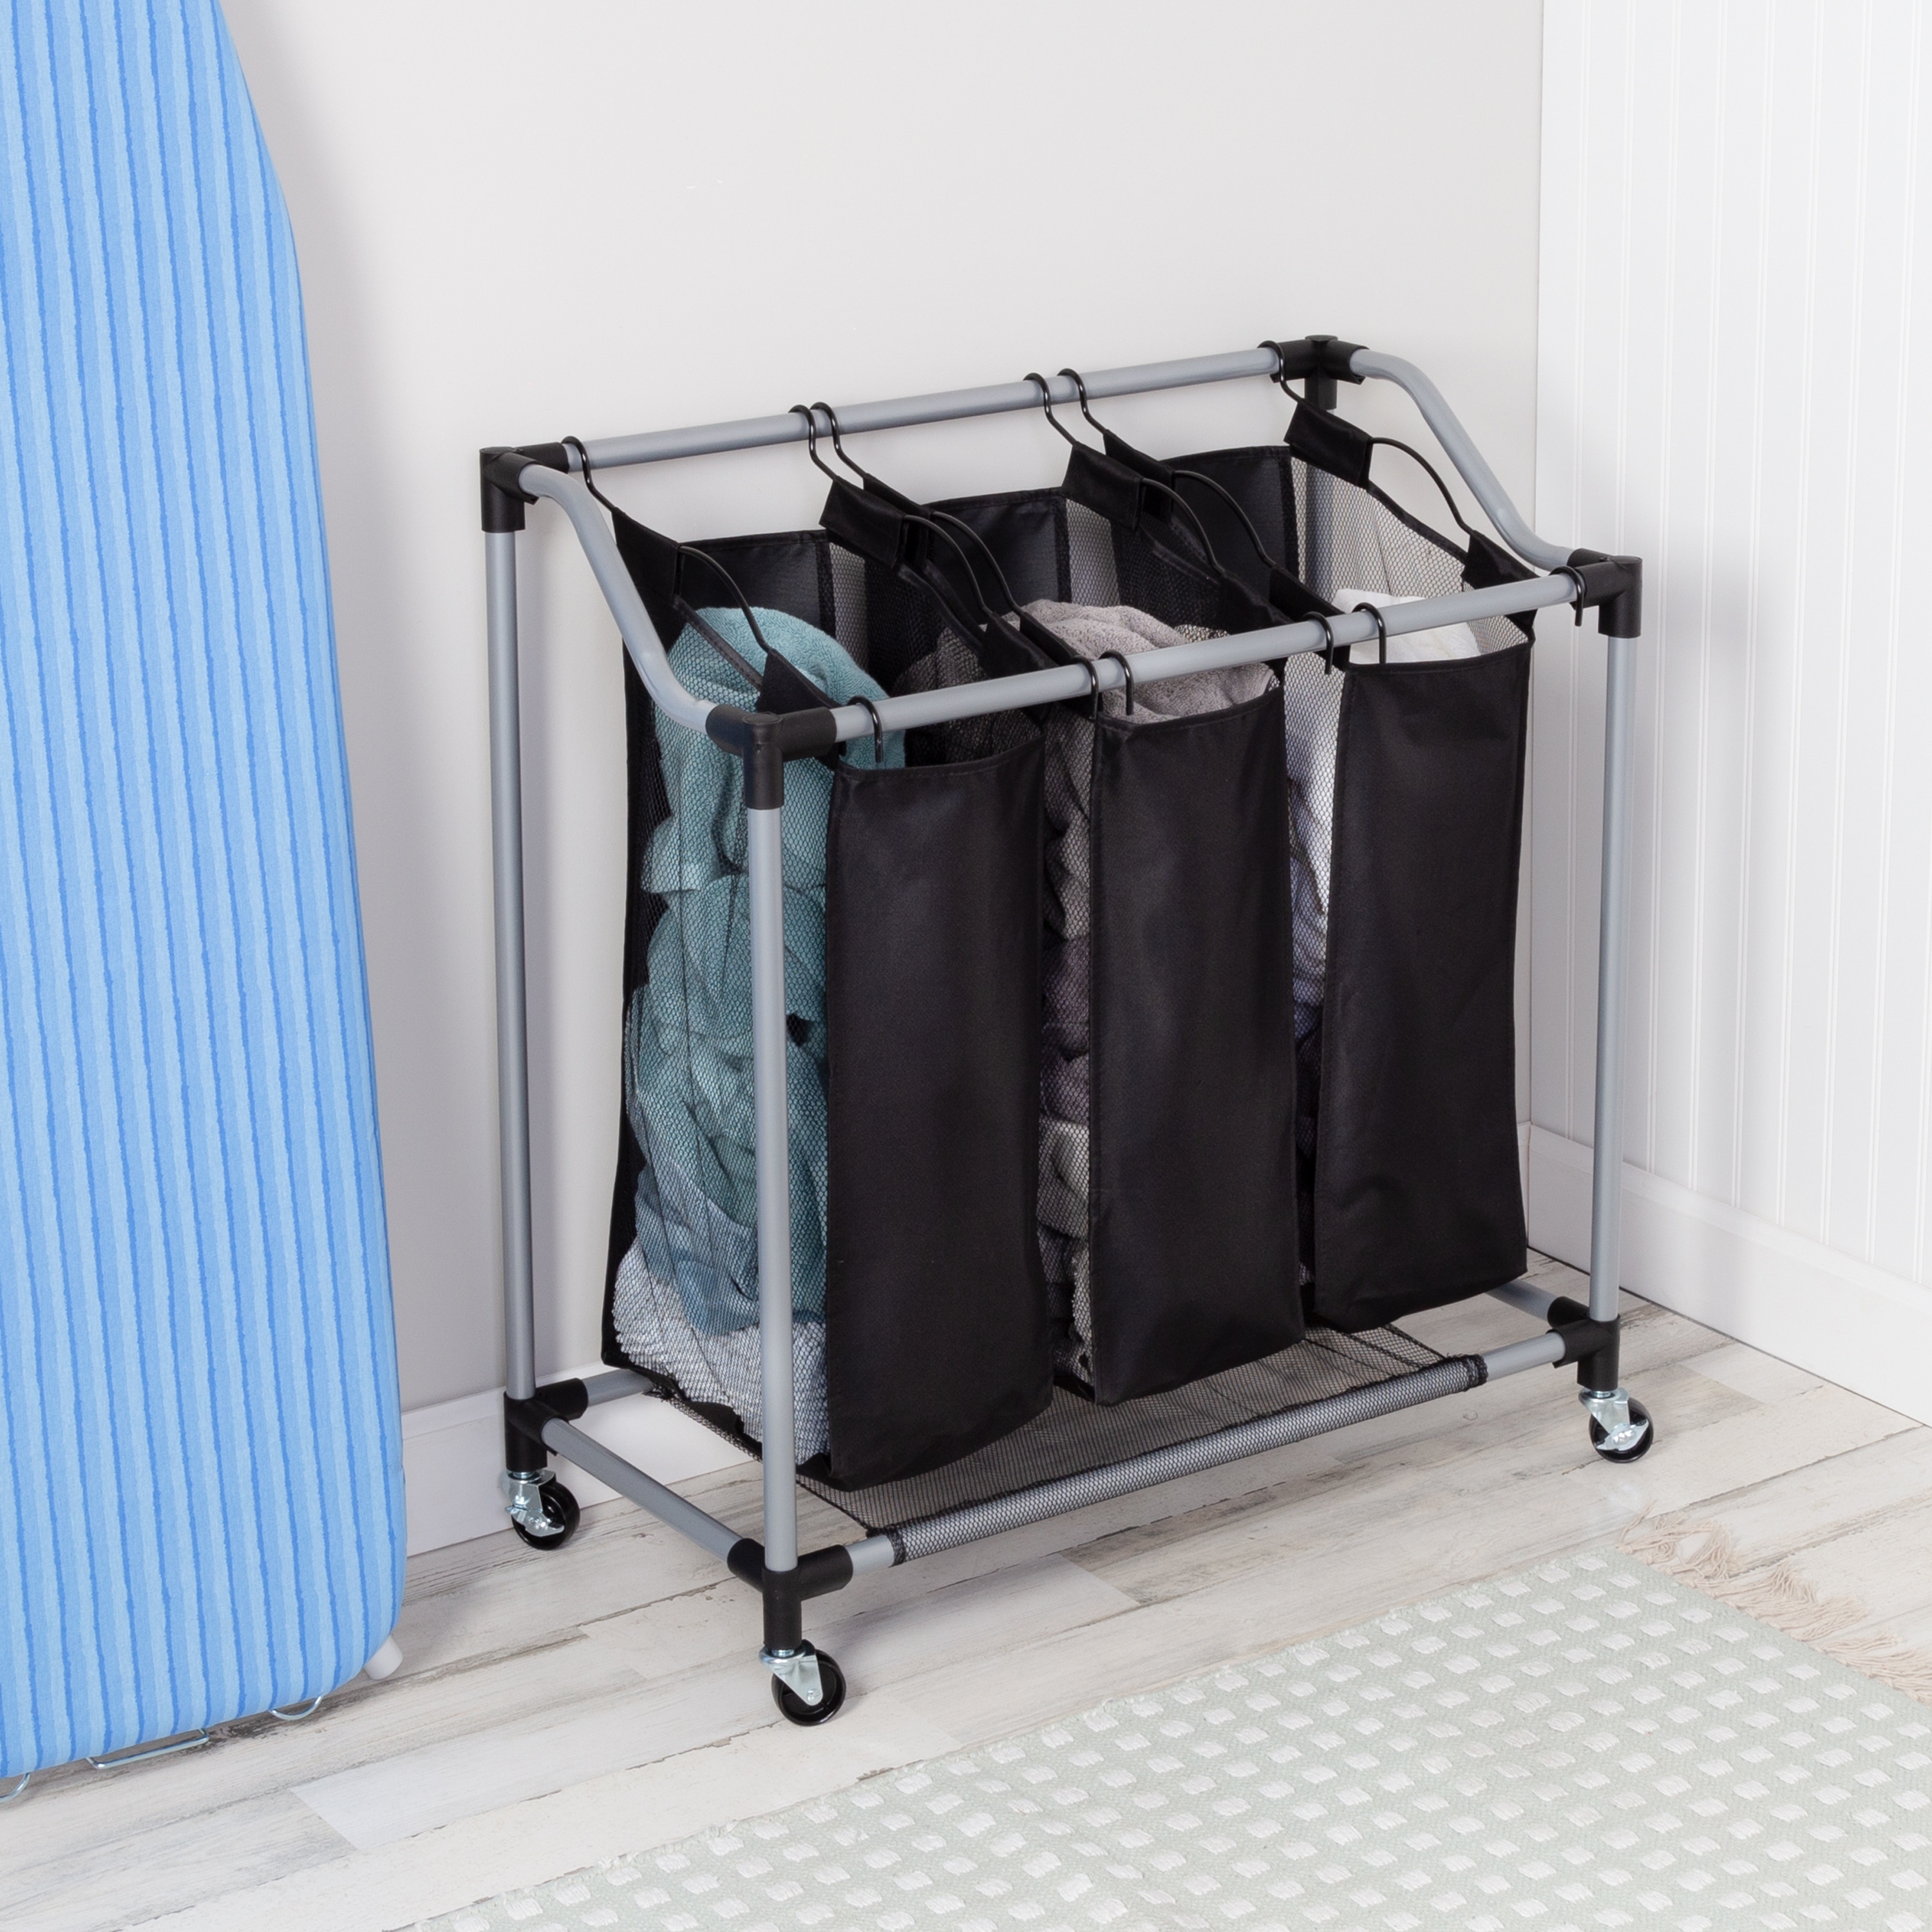 Whitmor Chrome Laundry Center With Mesh Bags, Laundry